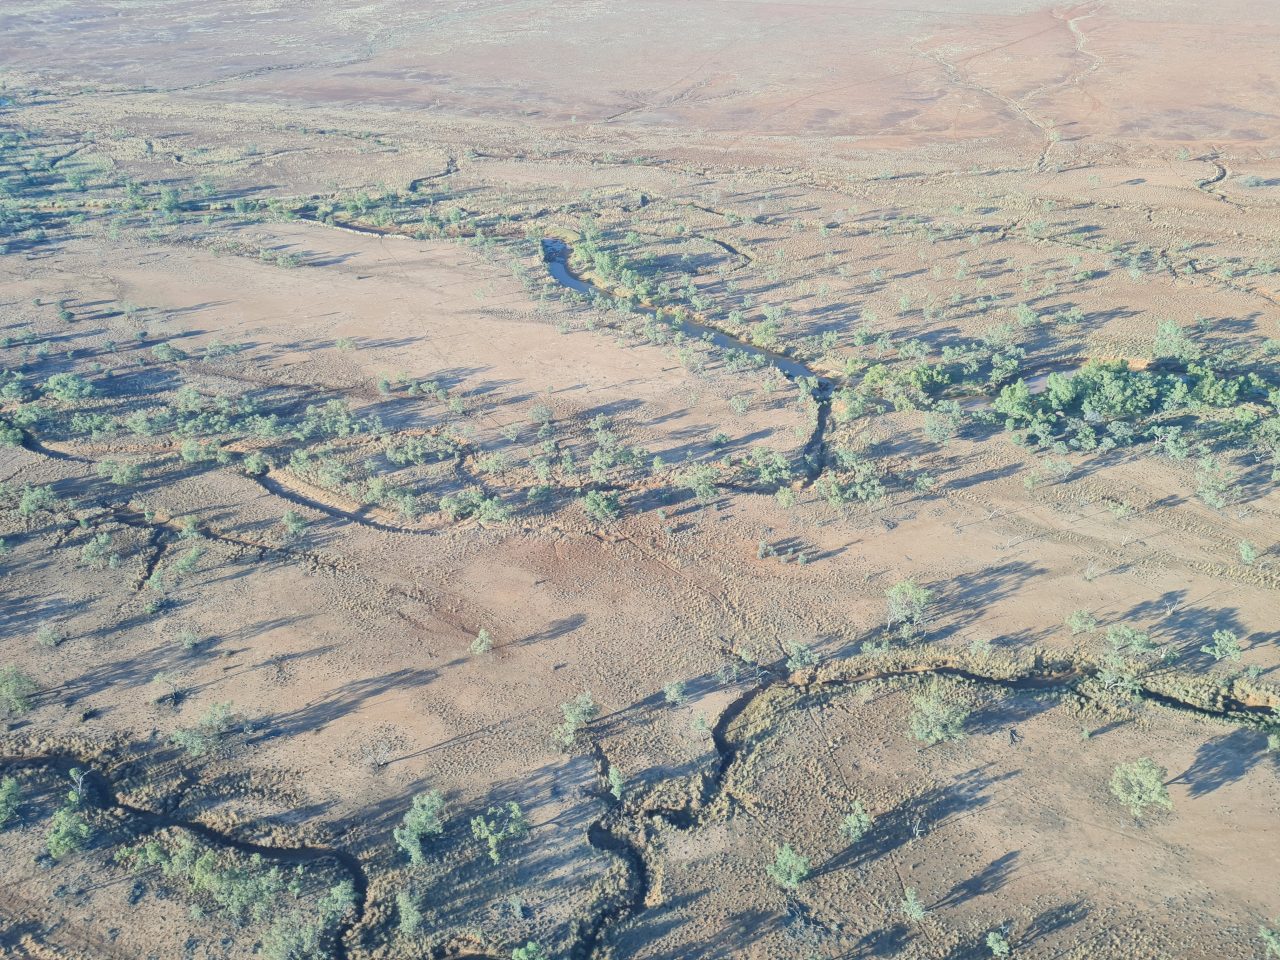 Aerial photo at sunrise of red soil floodplain with interweaving creek channels lined with vegetation becoming sparse over floodplain